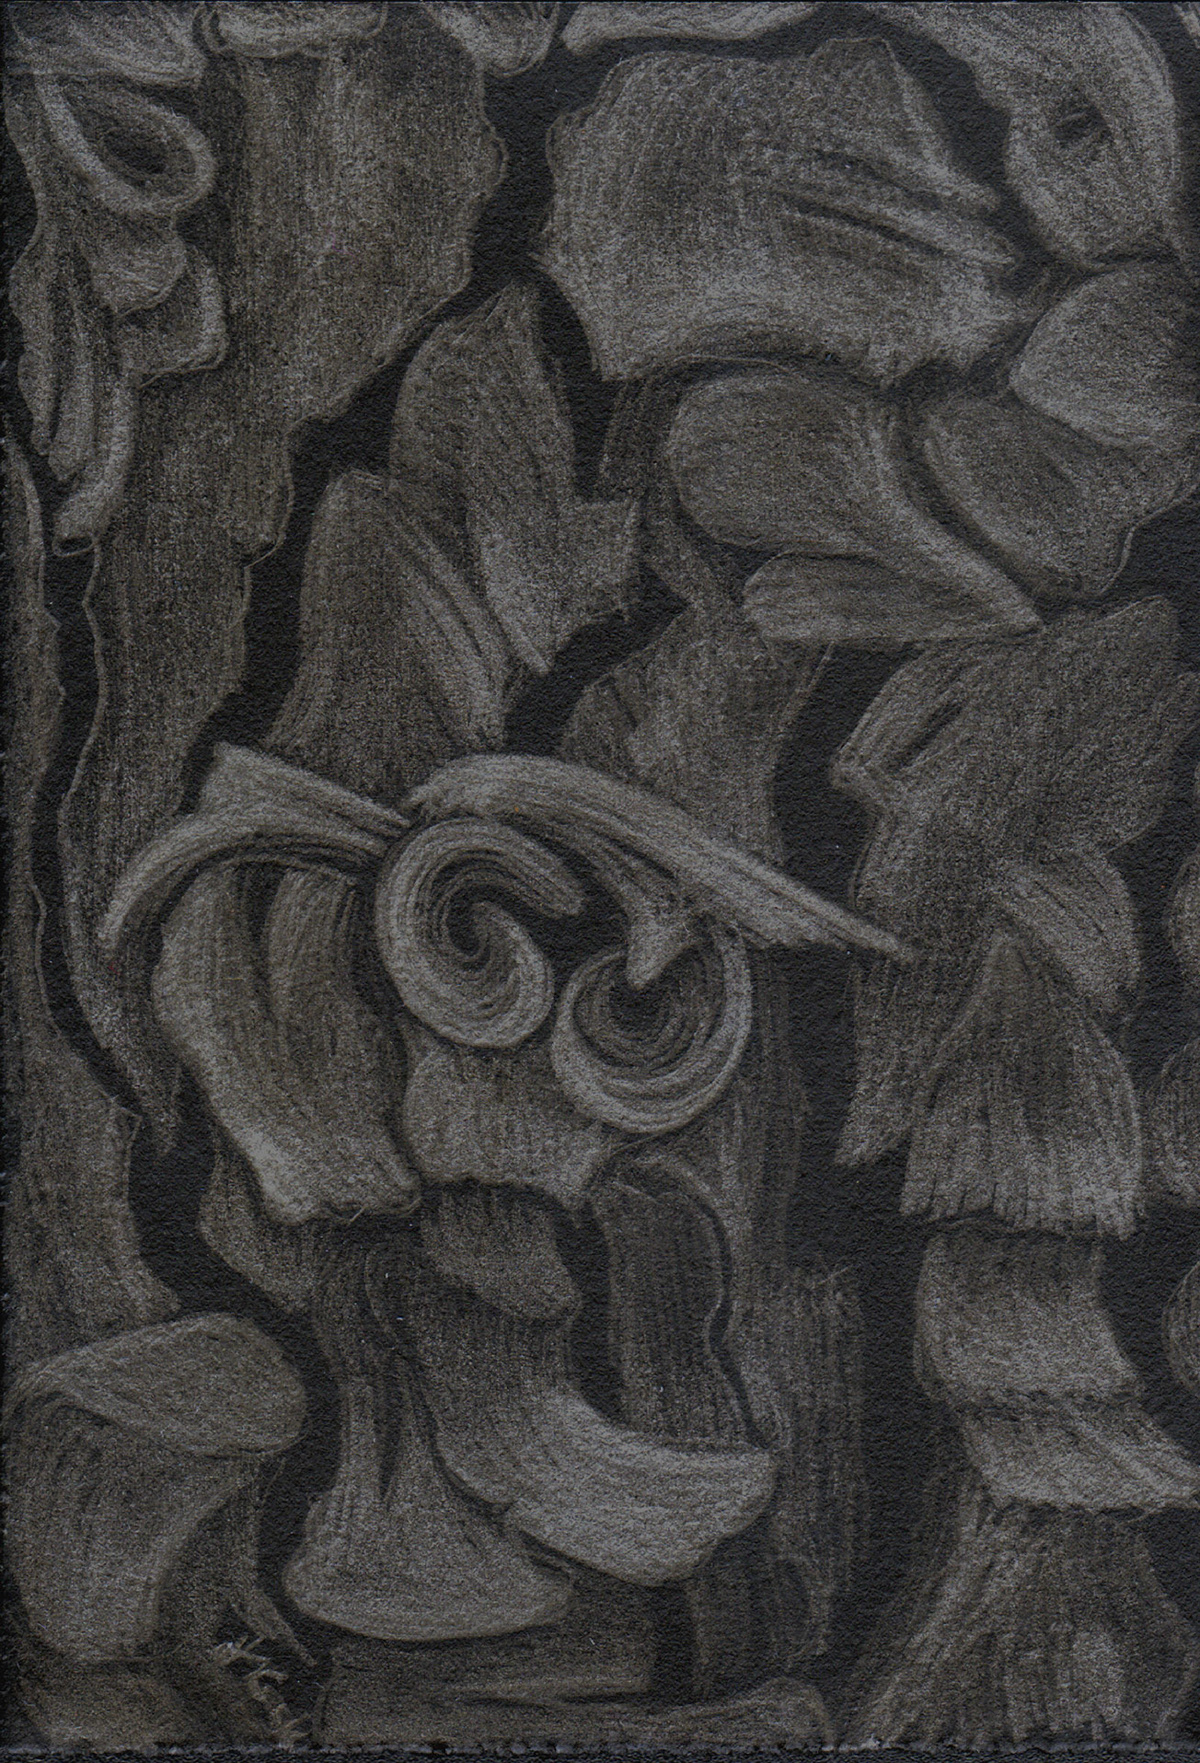 metalpoint    silverpoint   drawing nature-based